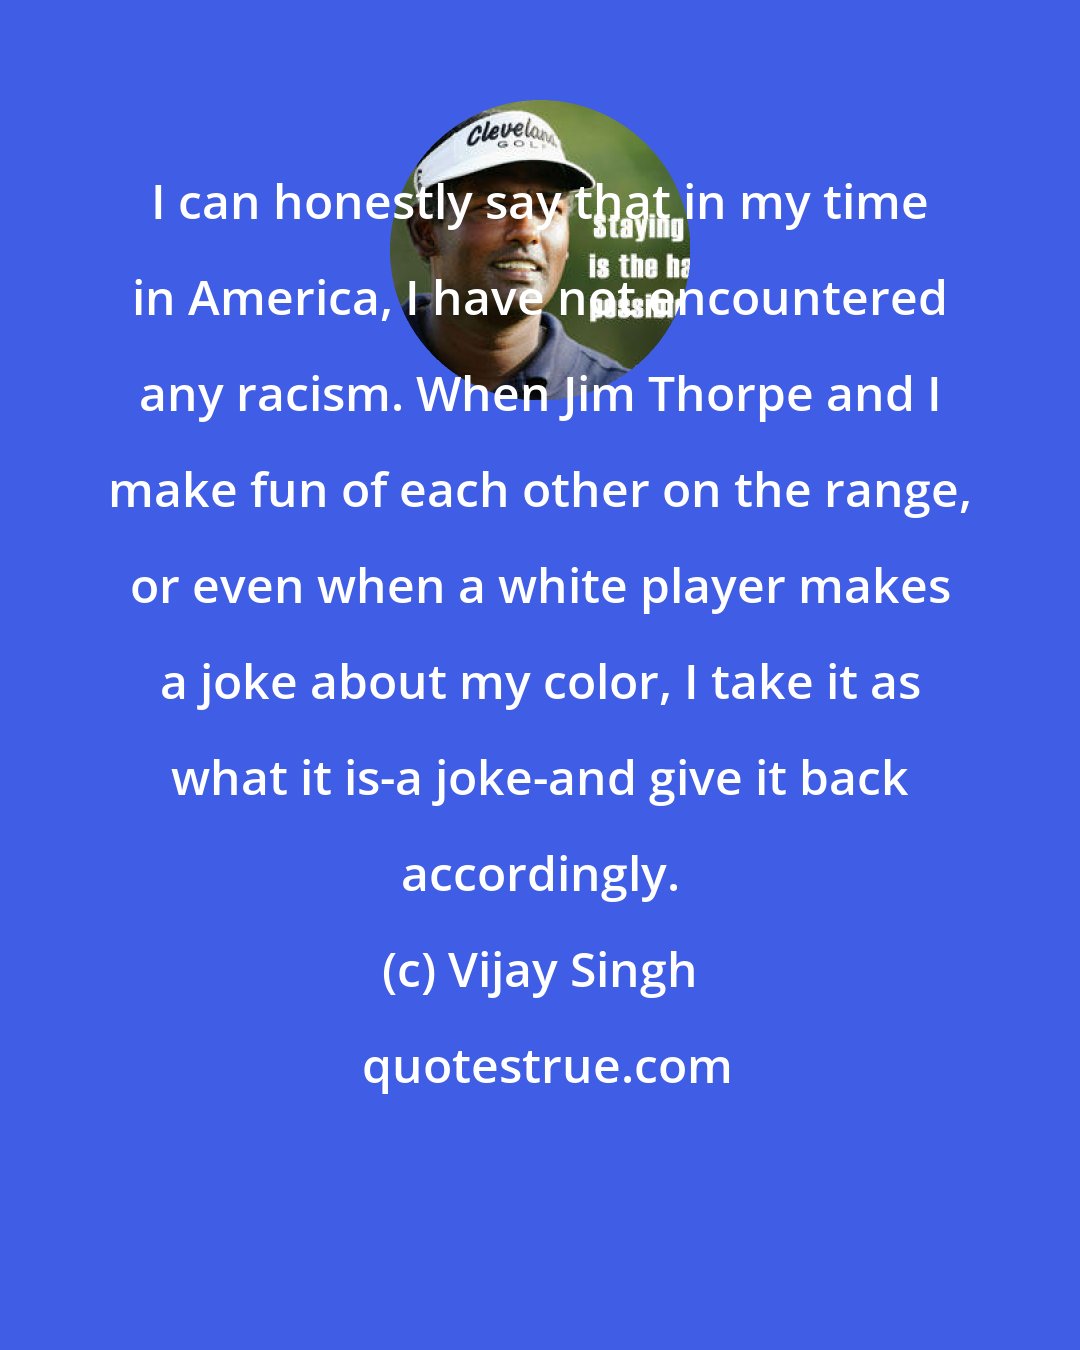 Vijay Singh: I can honestly say that in my time in America, I have not encountered any racism. When Jim Thorpe and I make fun of each other on the range, or even when a white player makes a joke about my color, I take it as what it is-a joke-and give it back accordingly.